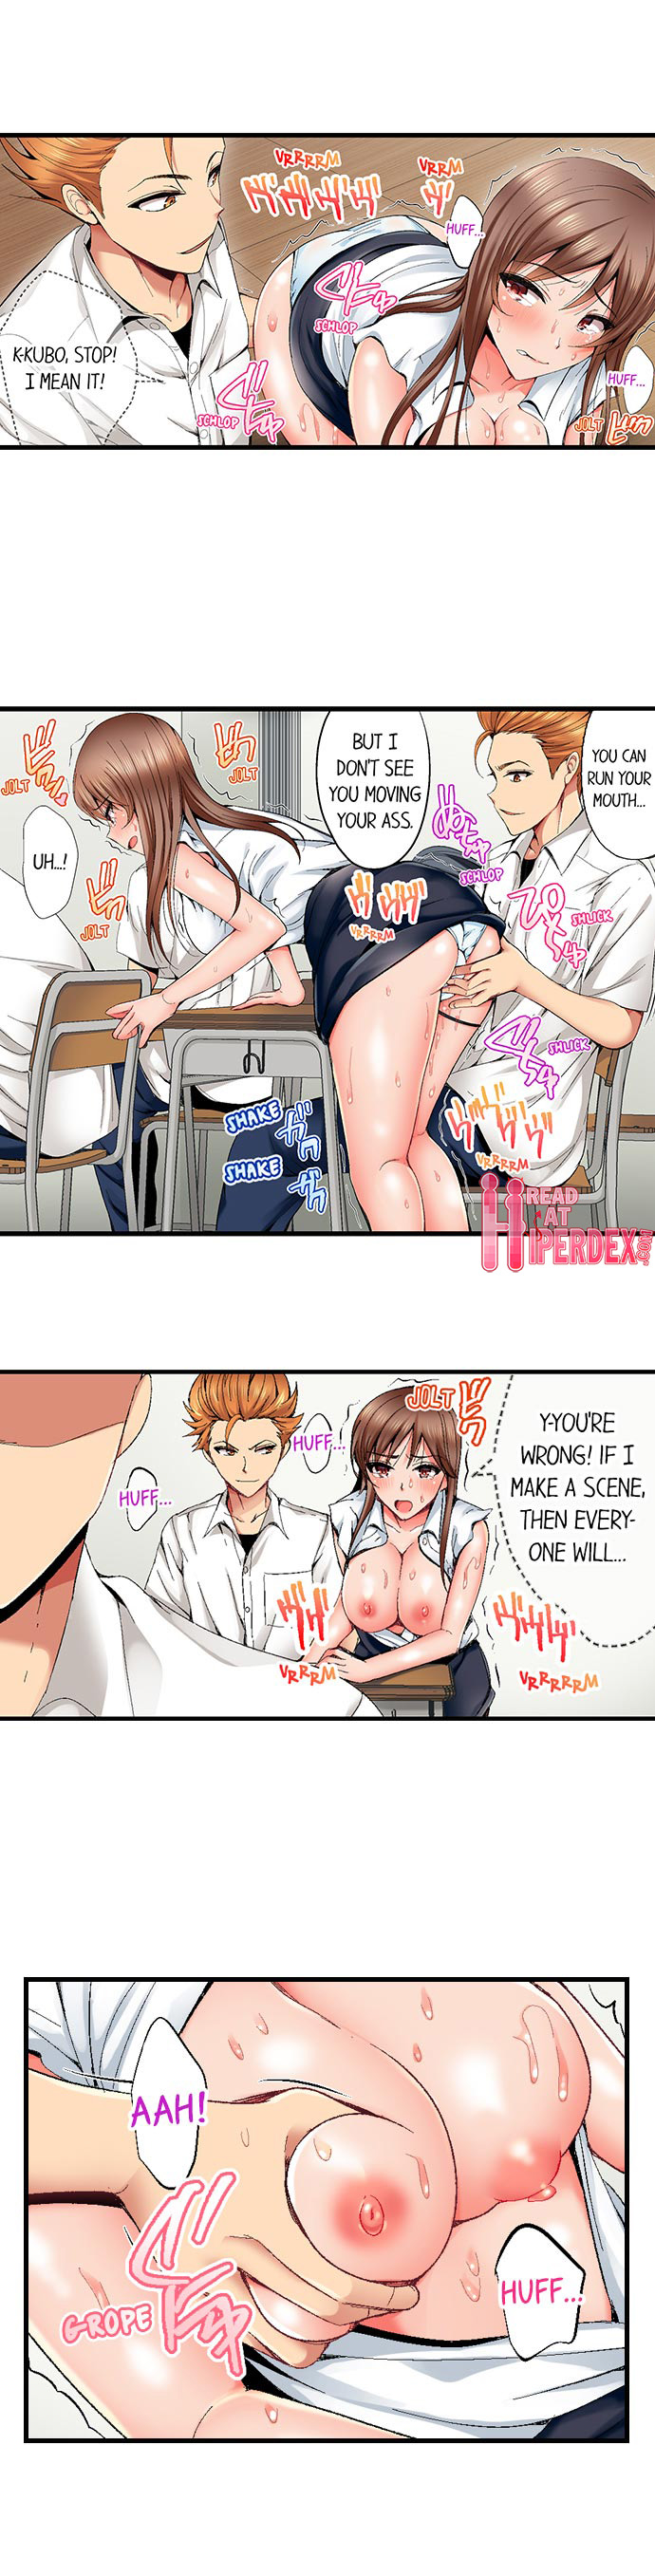 Netorare My Teacher With My Friends - Chapter 8 Page 4